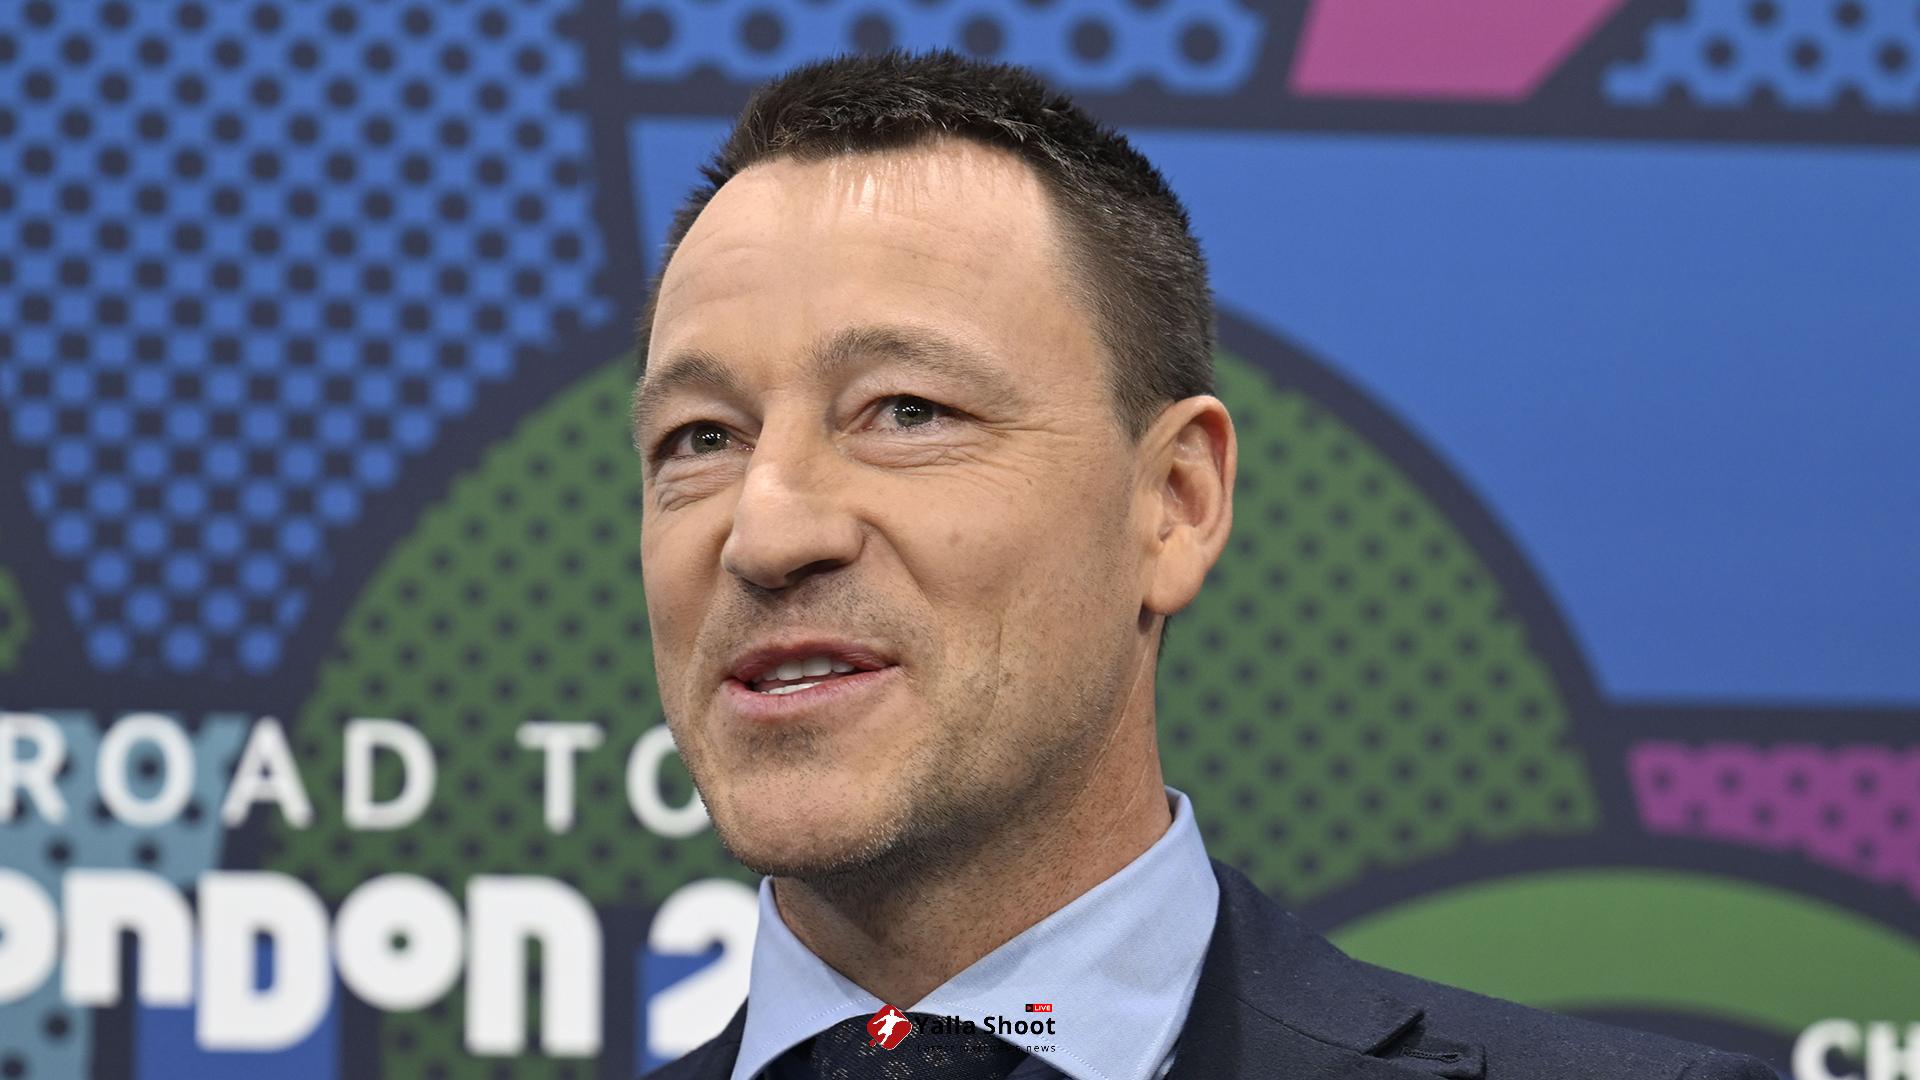 John Terry reveals why he turns off the plug sockets every day at Chelsea training ground as fans say he 'just gets it'